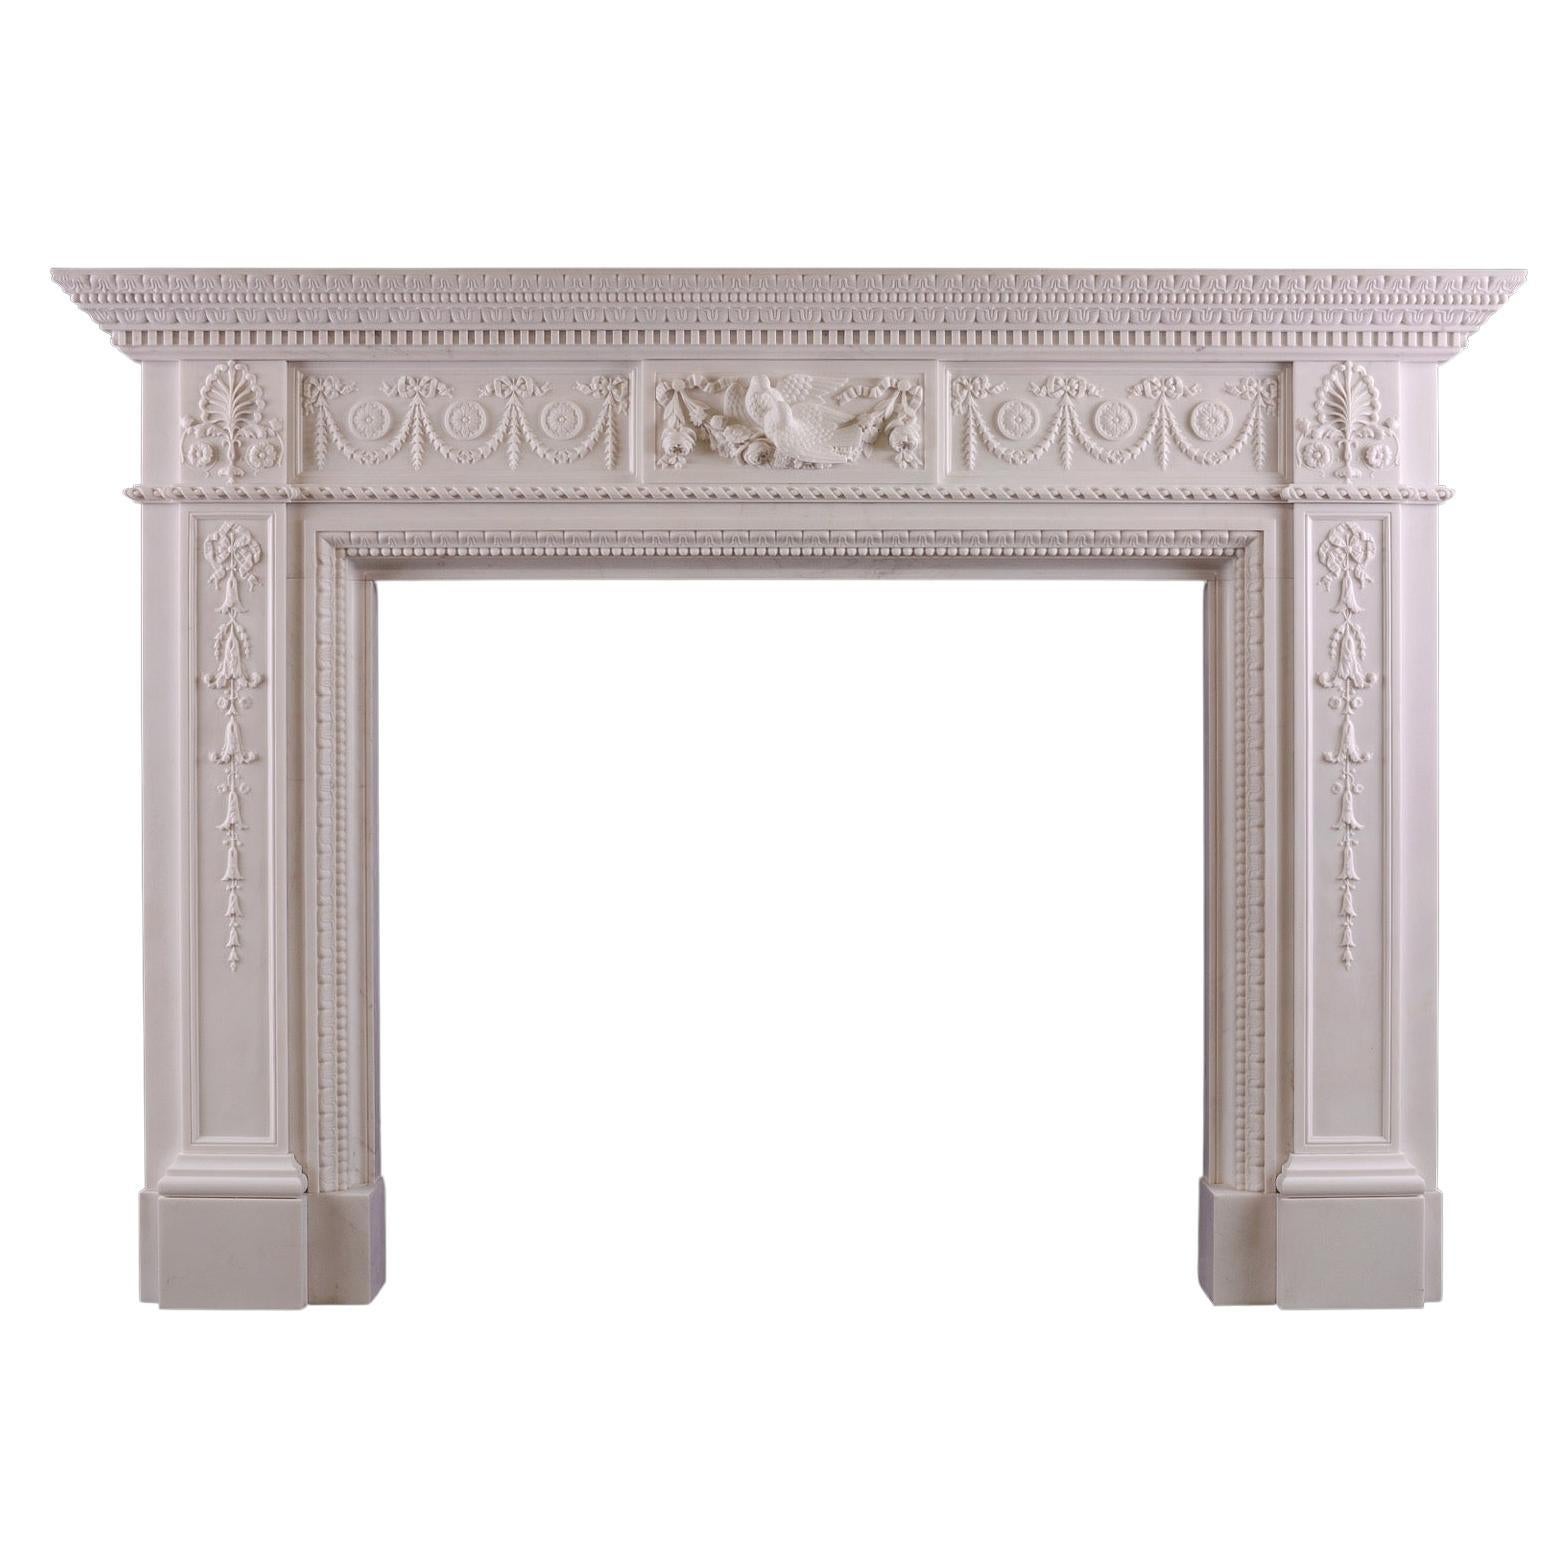 A Finely Carved White Marble Fireplace For Sale